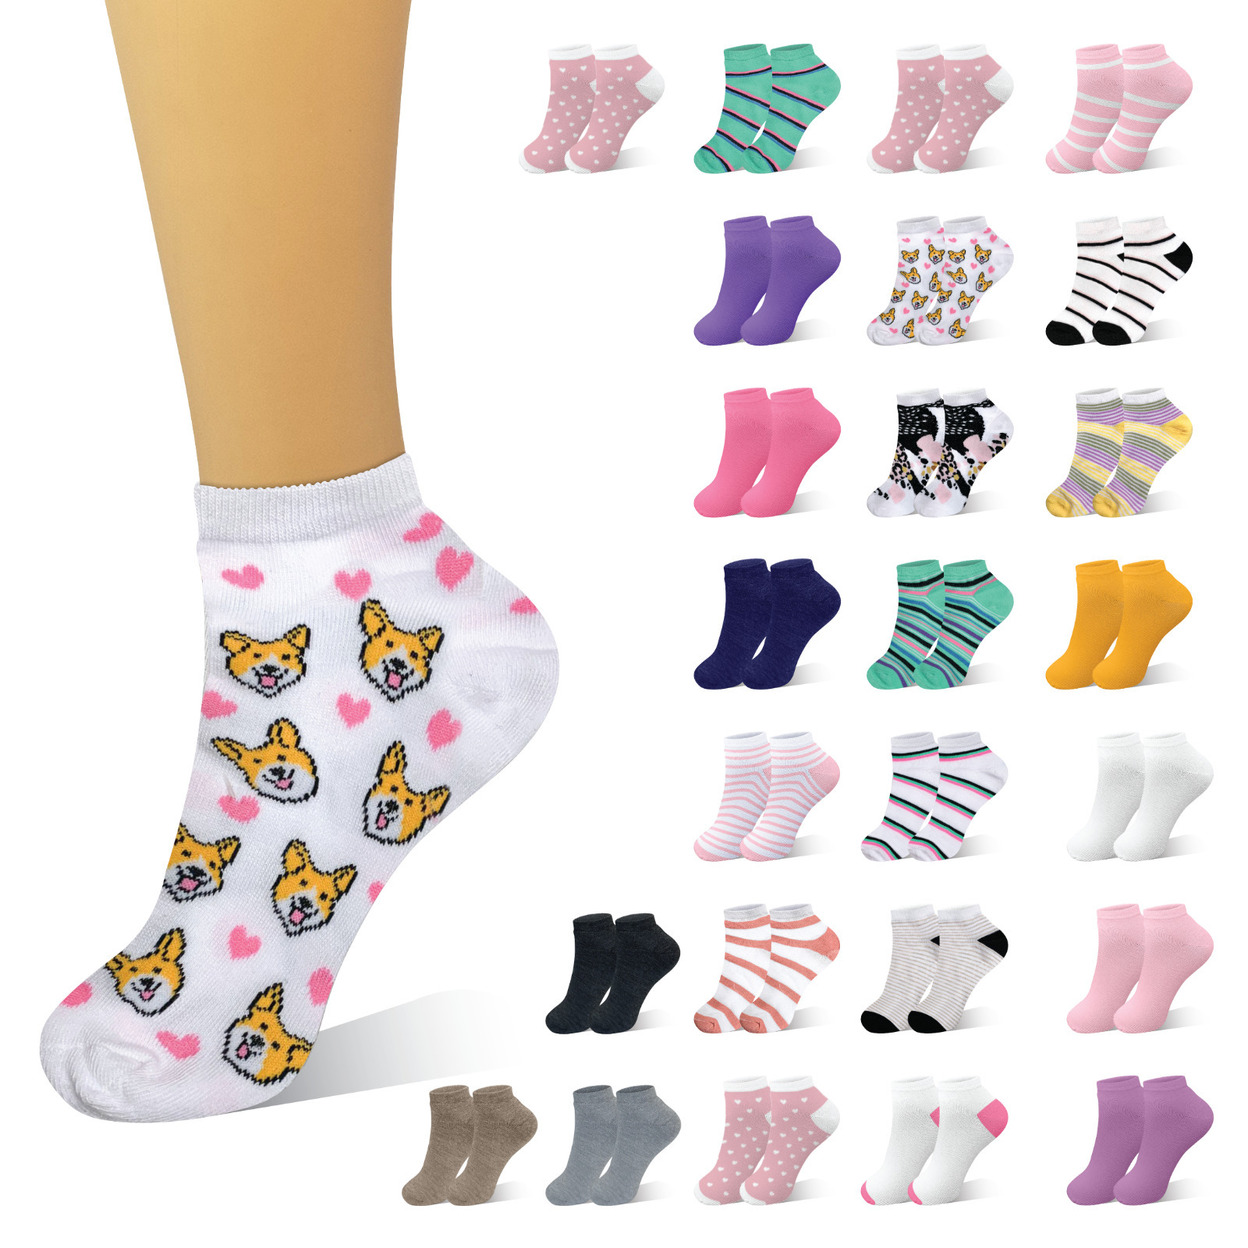 20-Pairs: Women’s Breathable Fun-Funky Colorful No Show Low Cut Ankle Socks